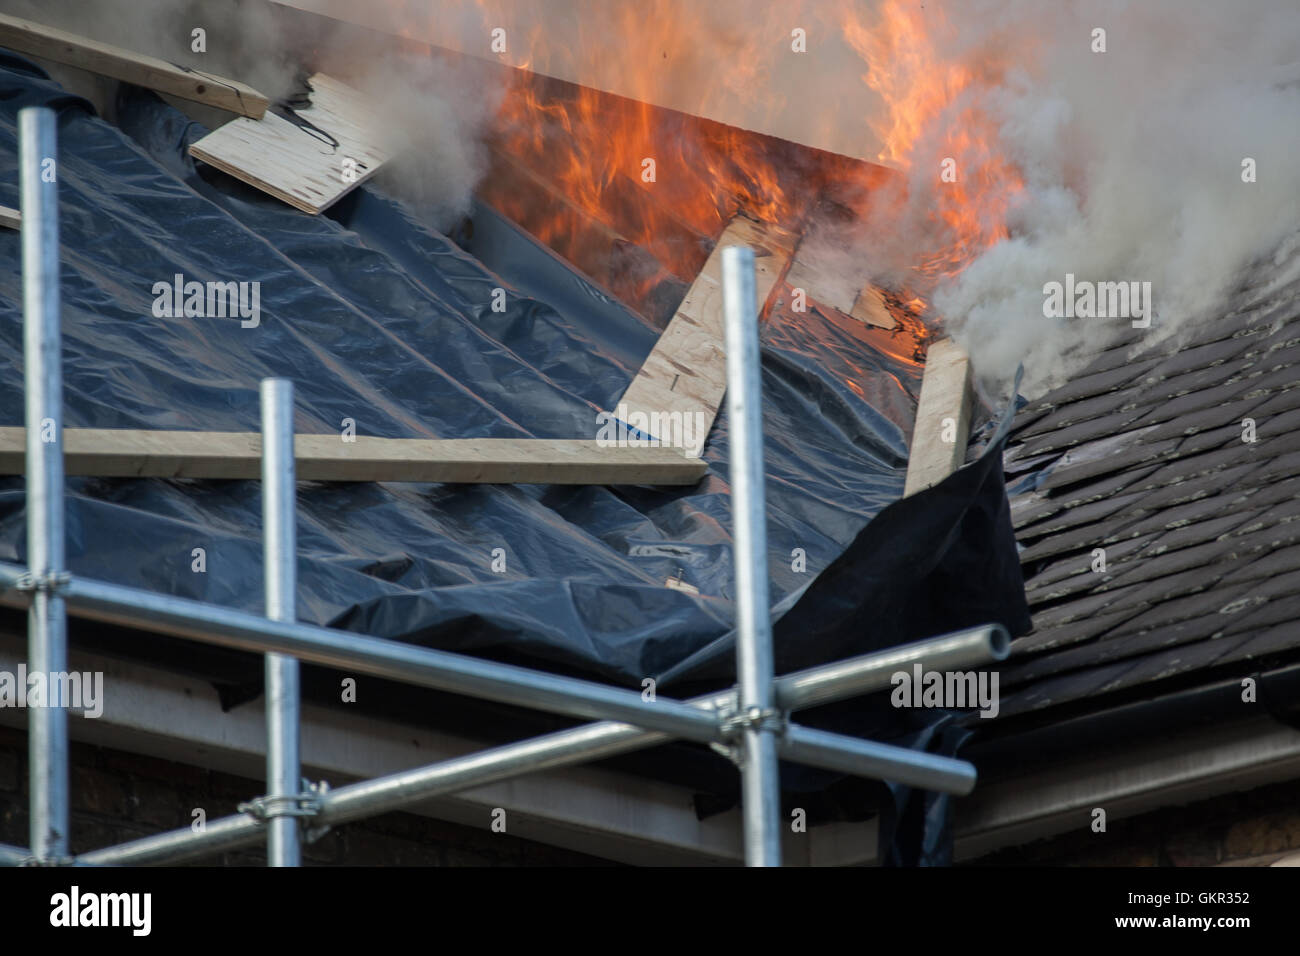 Fire breaks through the roof of a hotel under renovation in East London. Stock Photo